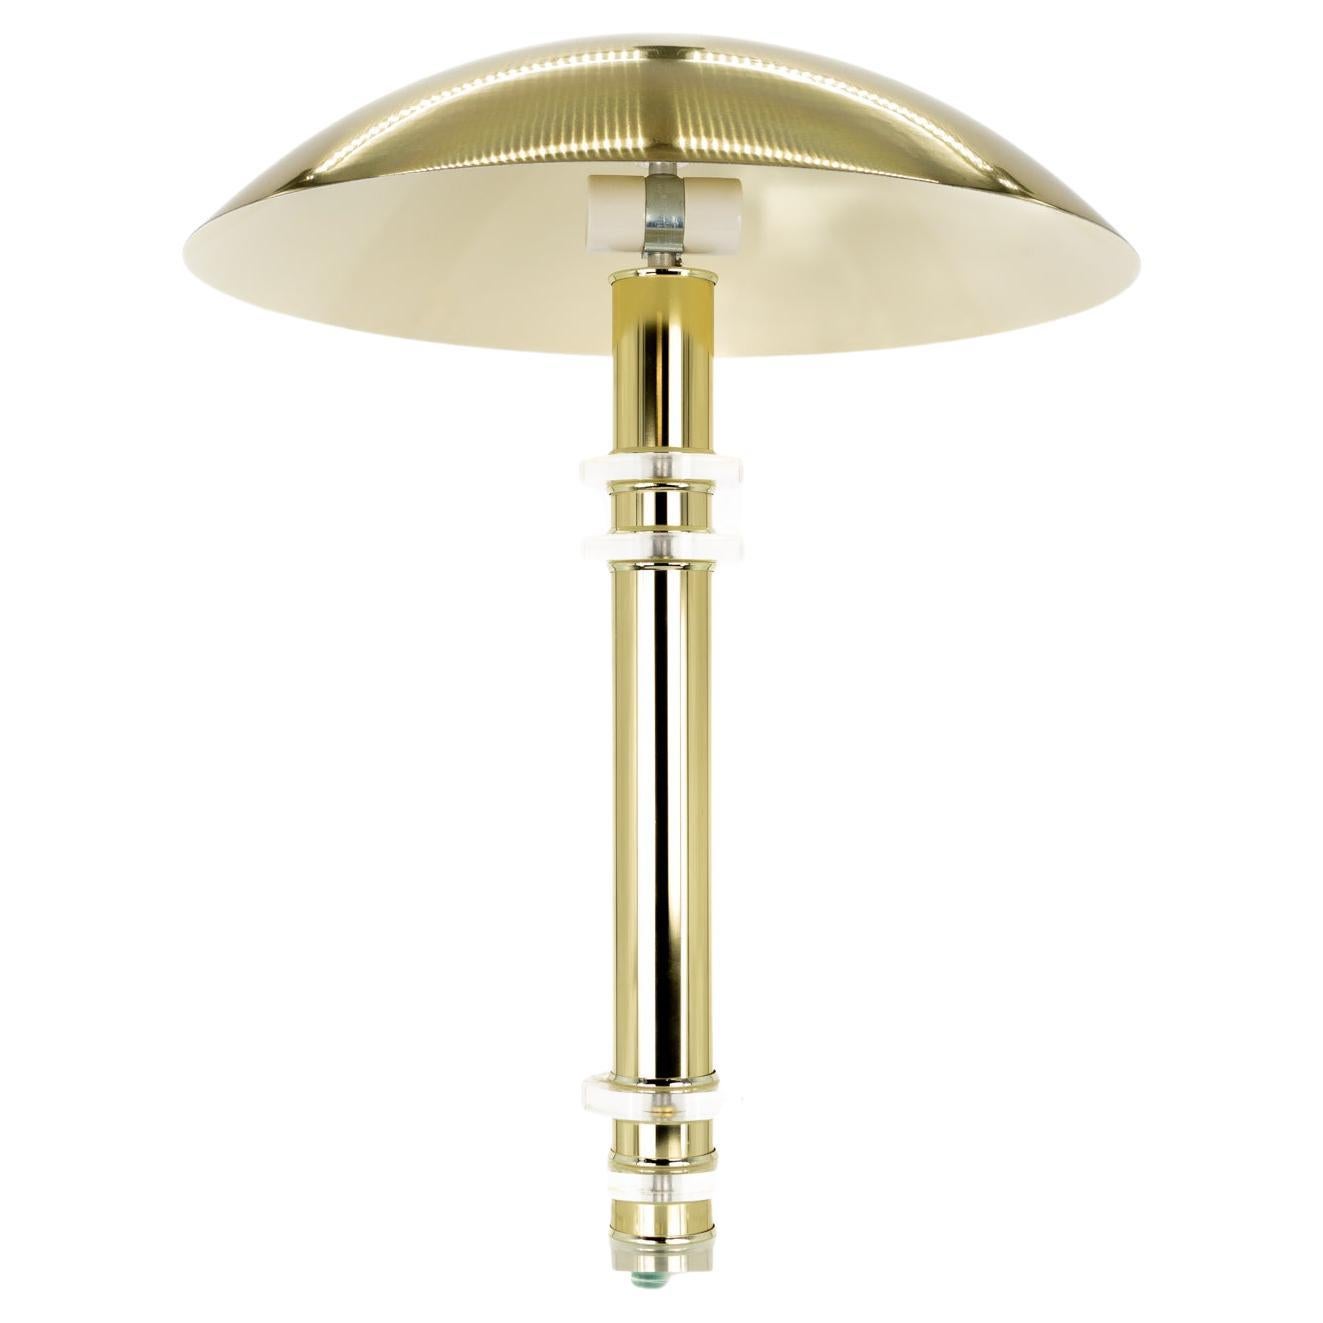 Mid Century UFO Brass and Lucite table lamp with aluminum dome shade

This lamp measures: 19 wide x 19 deep x 25 inches high and weighs 9.3 pounds

Excellent vintage condition

We take our photos in a controlled lighting studio to show as much